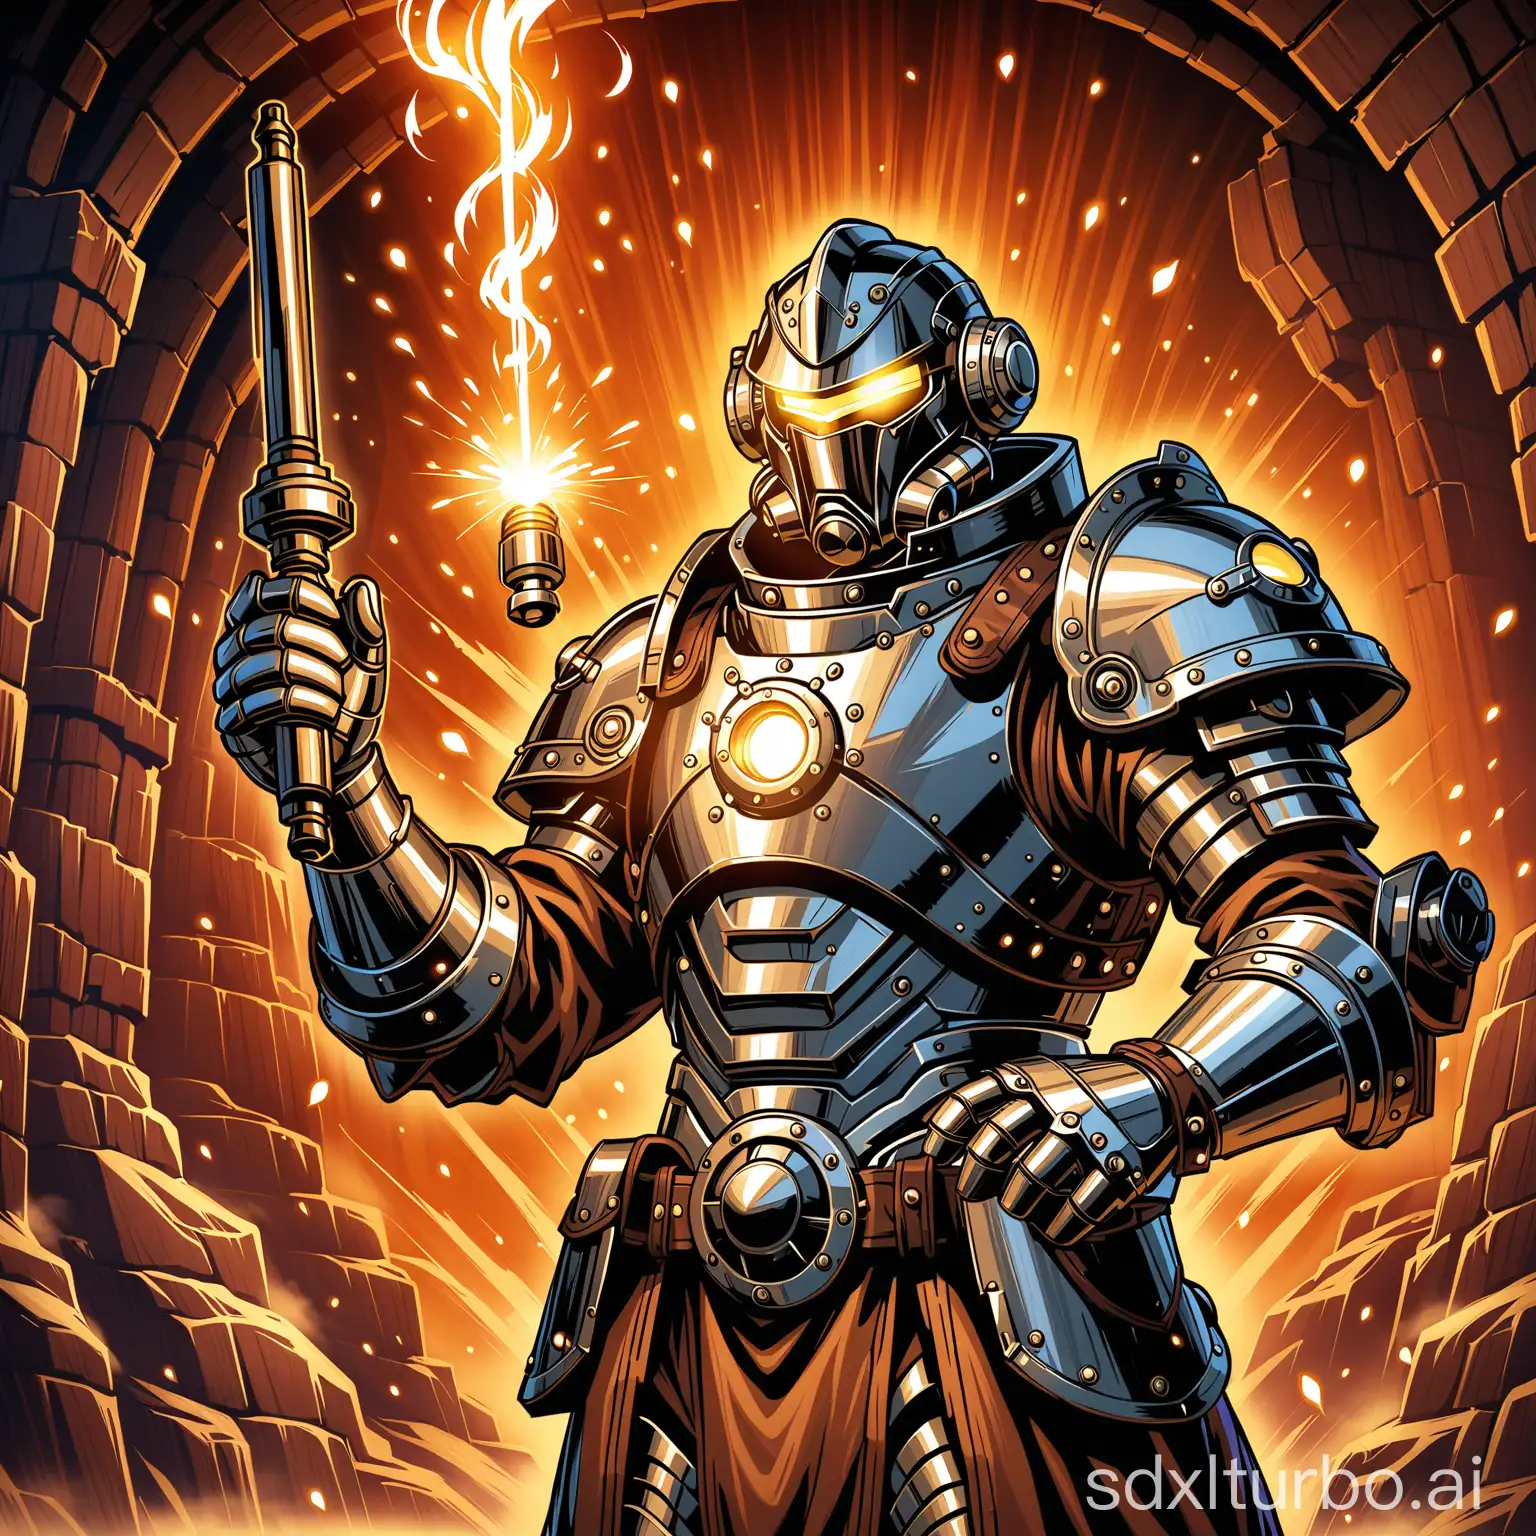 Create a high resolution, image about "Dungeons & Dragons" and "Artificer". Show a man, around 40 years in steam-punk-magic-power-armor, holding a spark in the right hand trying to adjust it with a screwdriver in the left hand